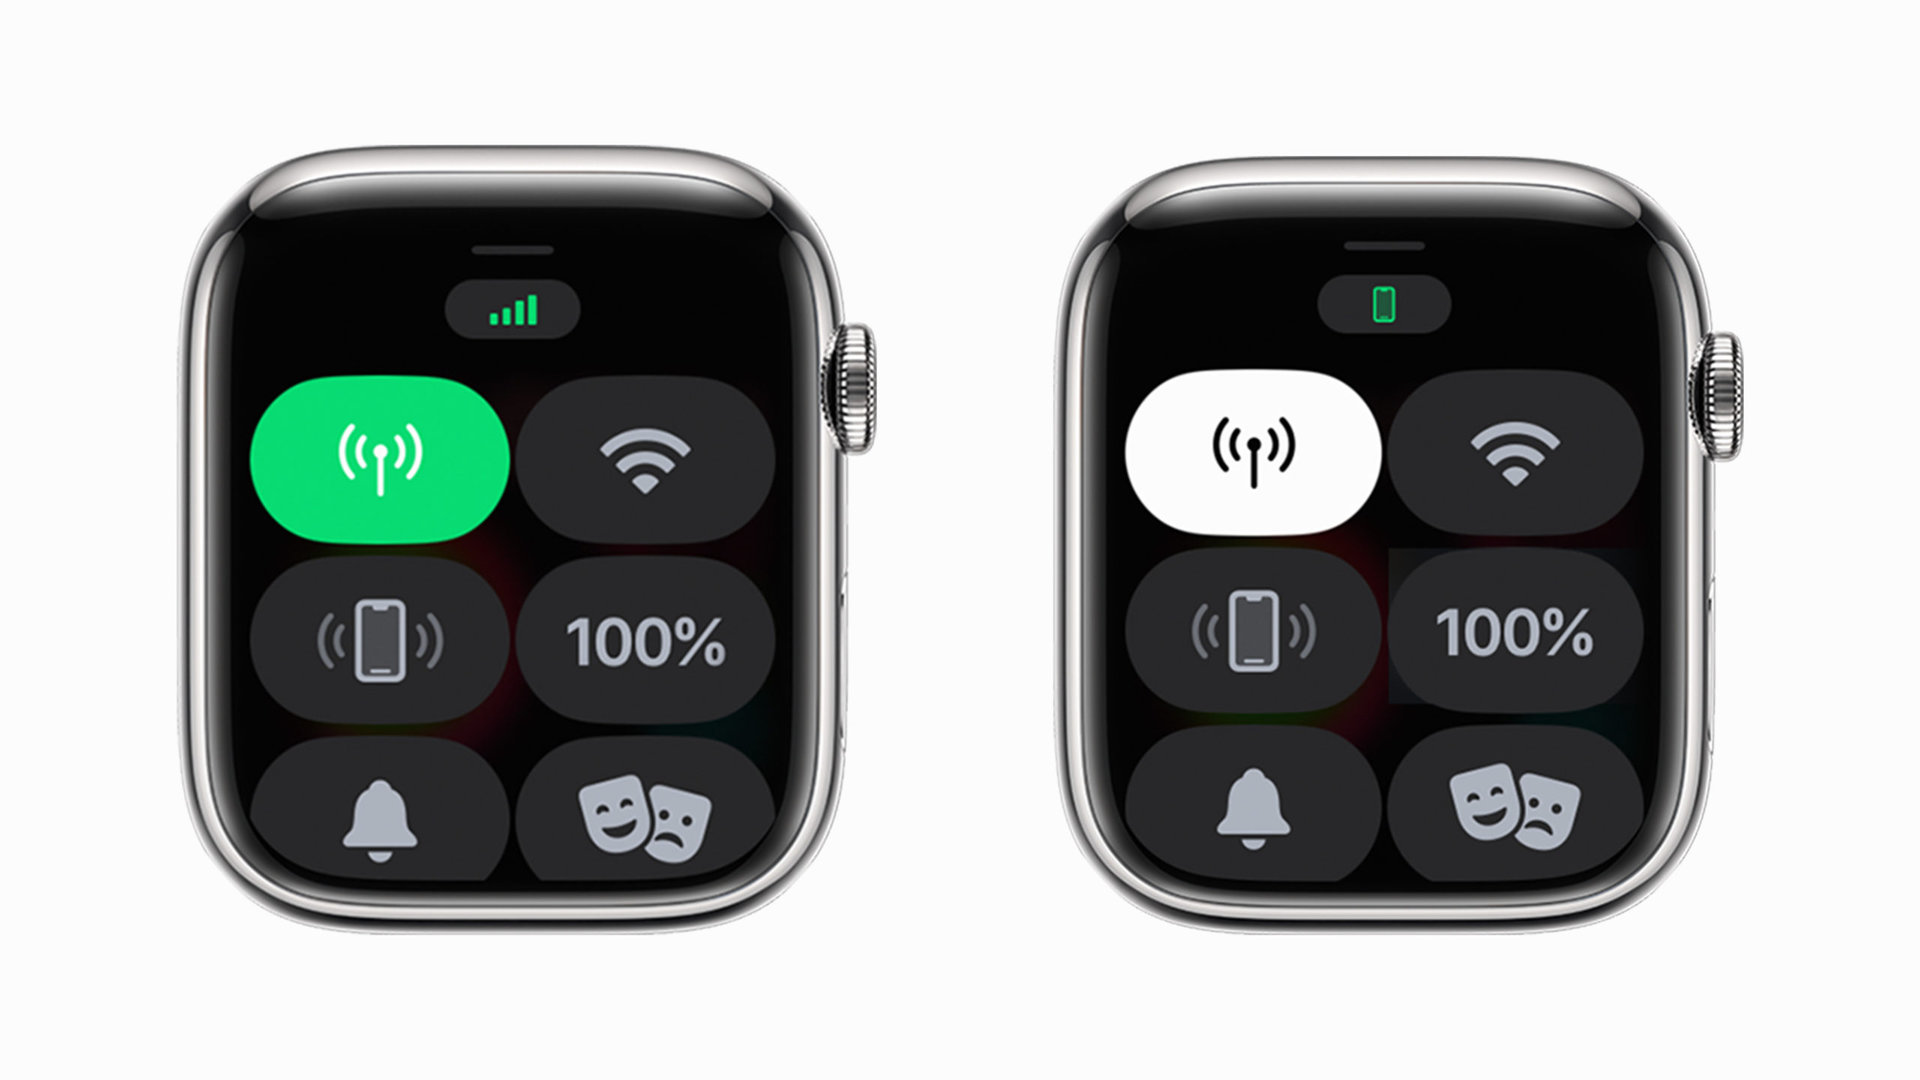 Two illustrations of Apple Watch show the possible cellular signal icons that data users will find on their control panel.